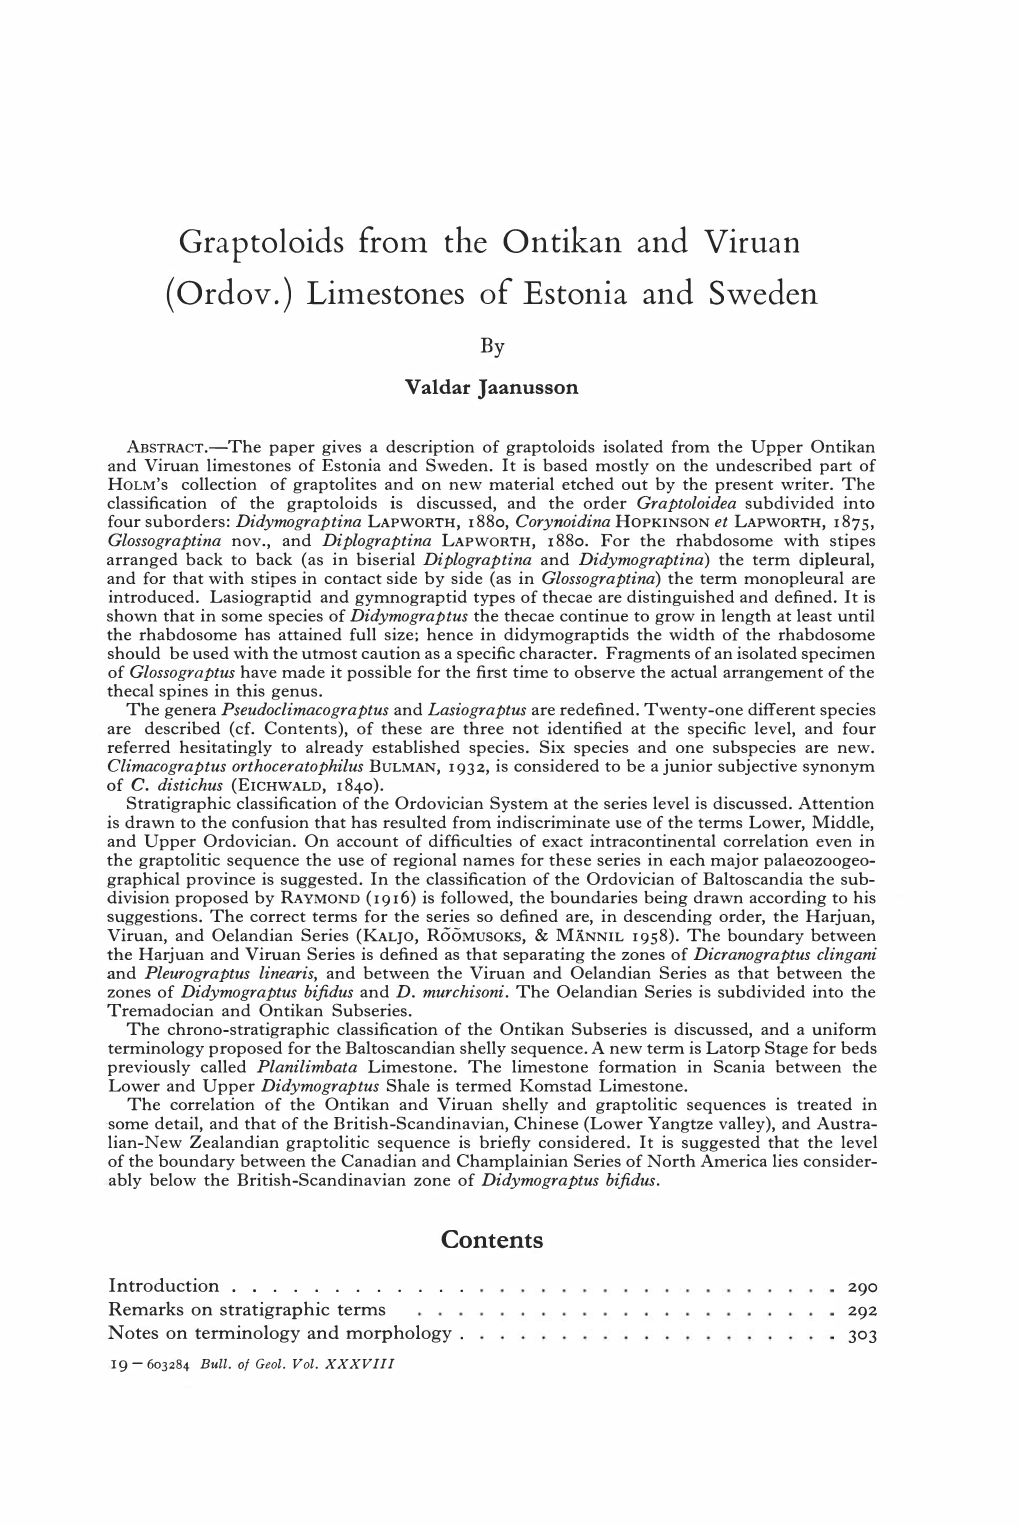 Graptoloids from the Ontikan and Viruan (Ordov.) Limestones of Estonia and Sweden